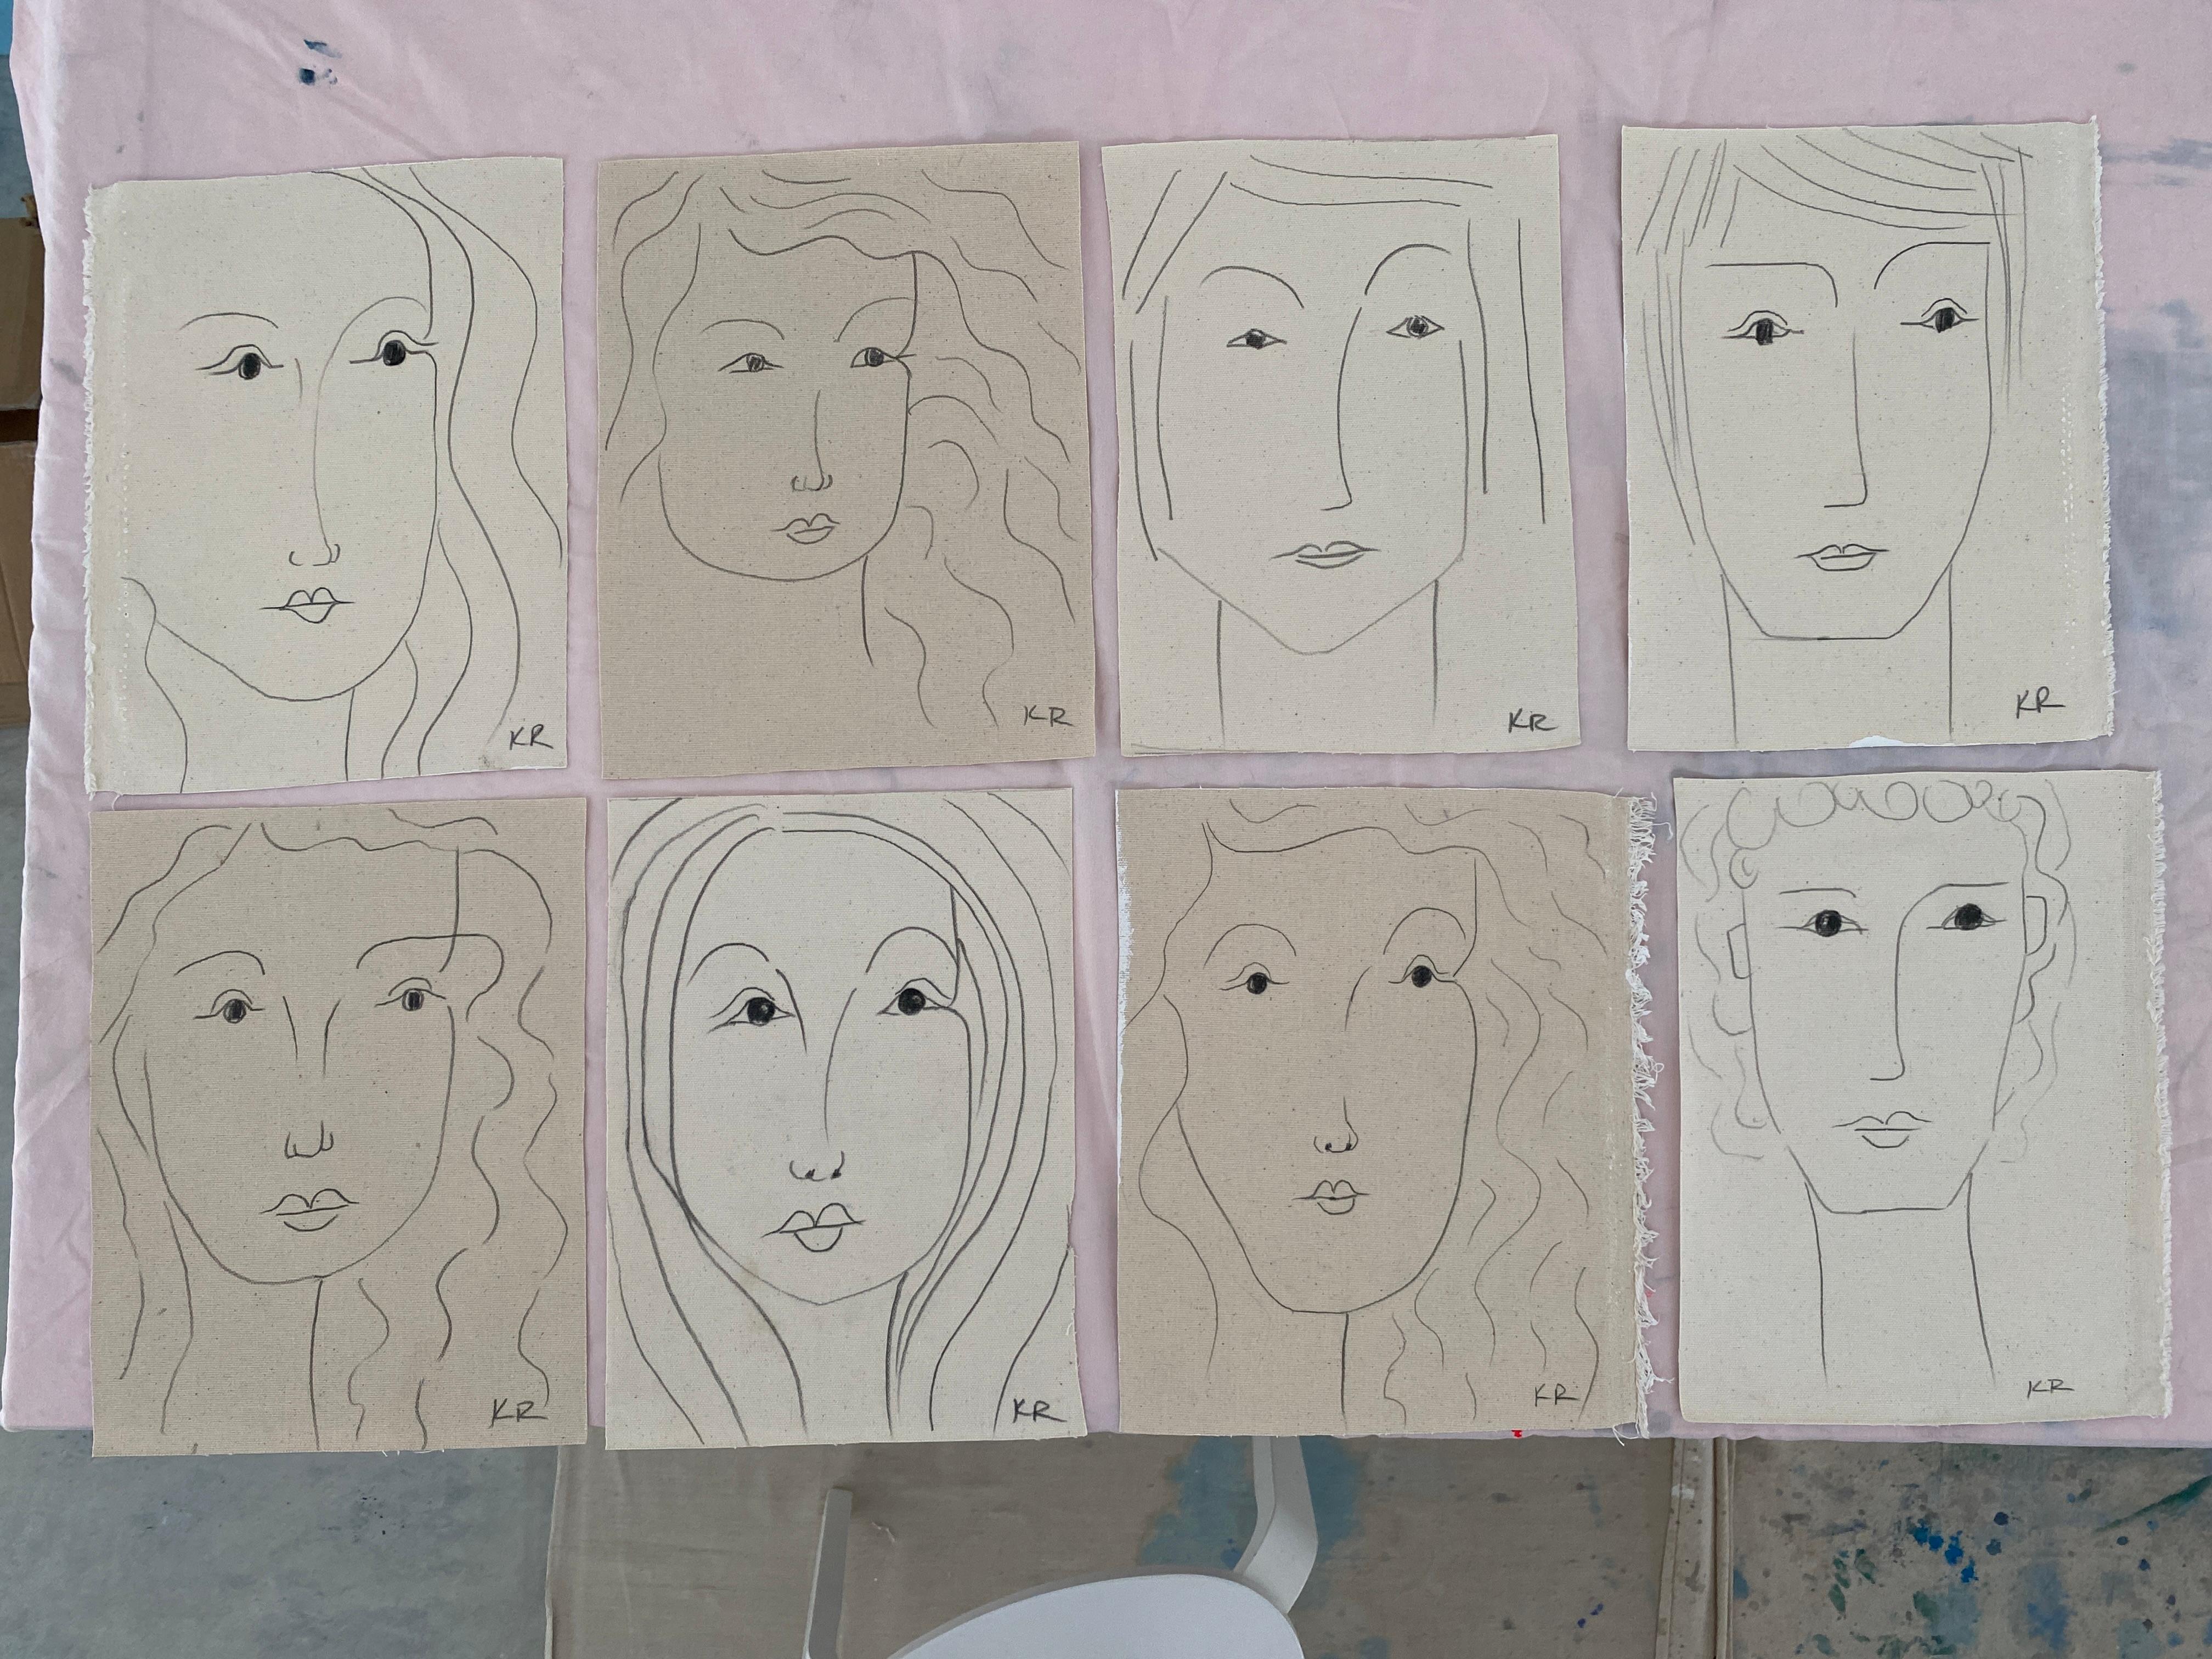 Minimalist portrait sketch collection in pencil on canvas. An elegant small drawing series of works on flat canvas exploring the human face shaped in simple fluid lines and form. Inspired by Matisse's fluid and original draughtsmanship and